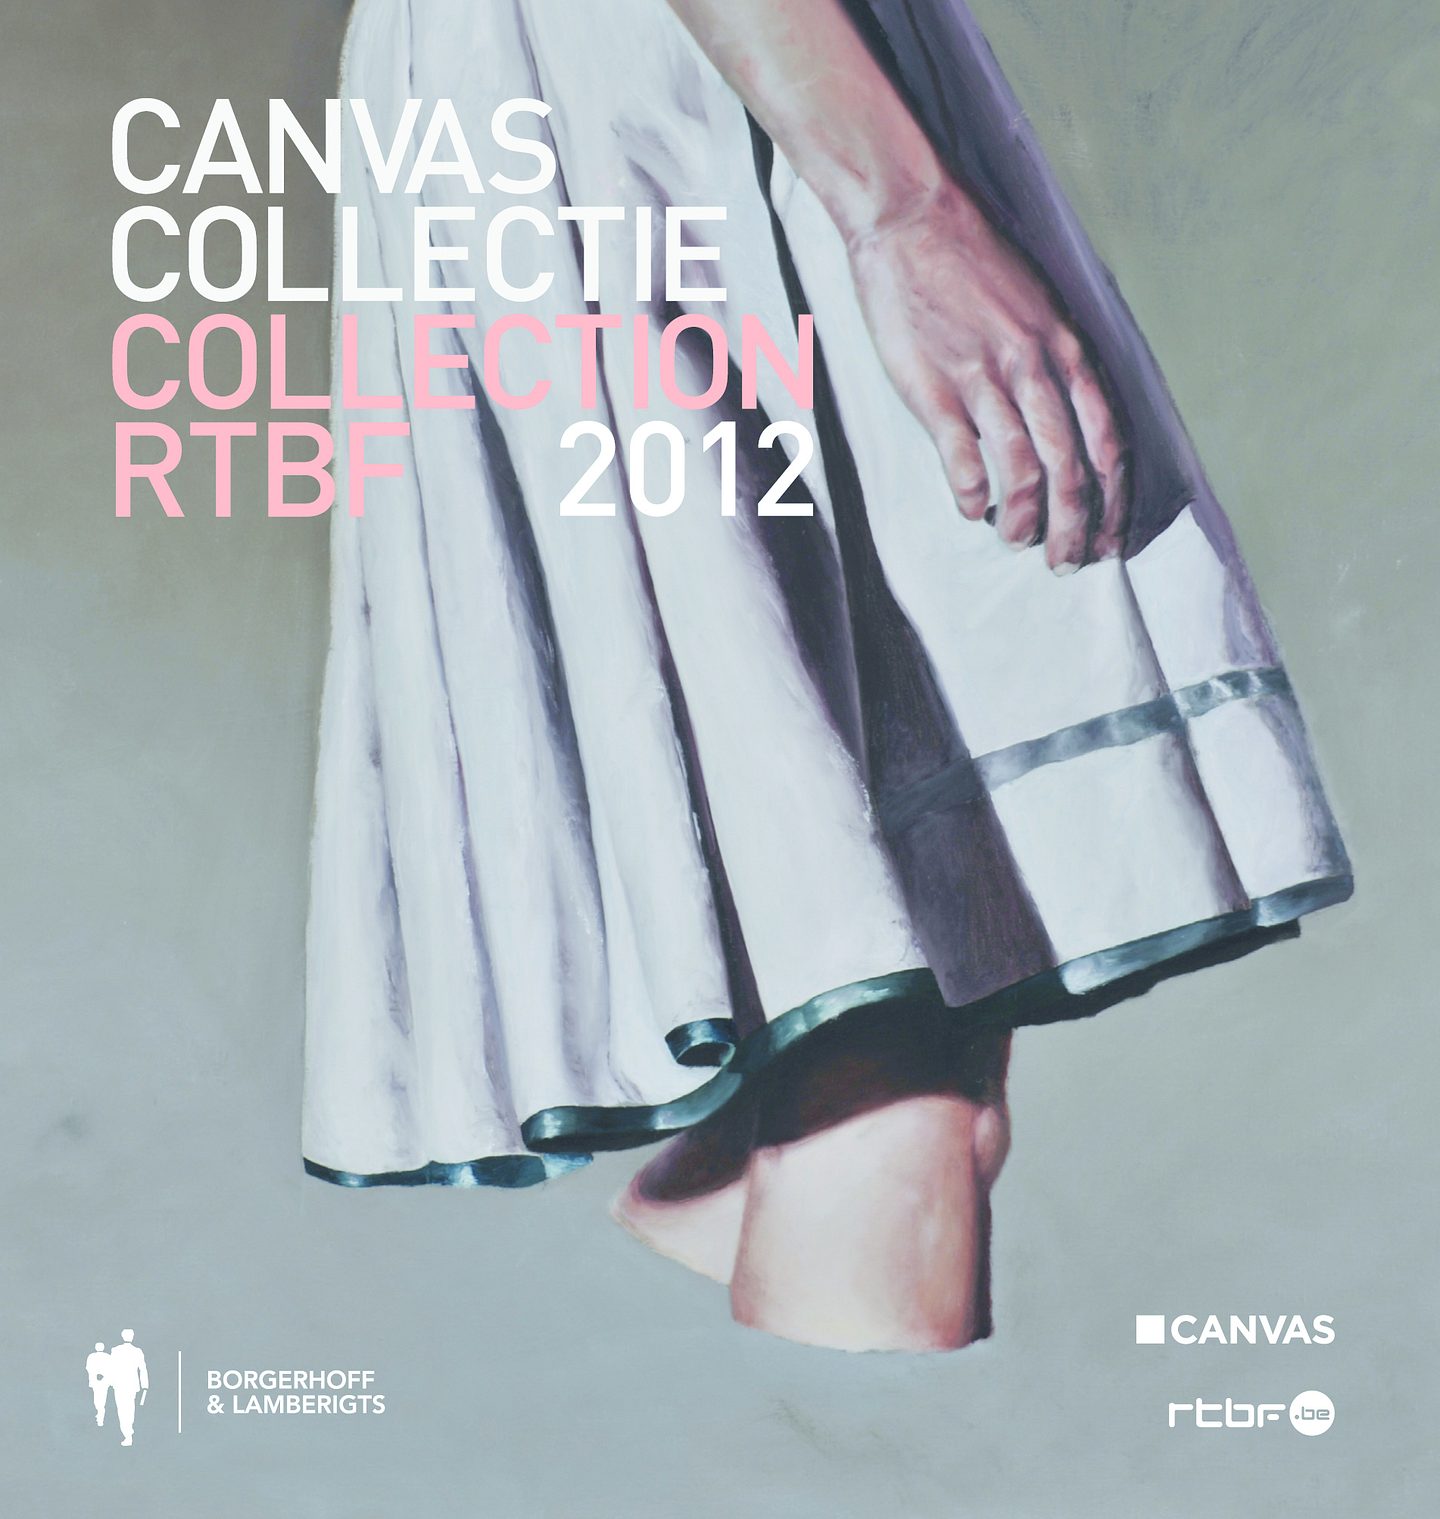 Canvascollectie / collection RTBF